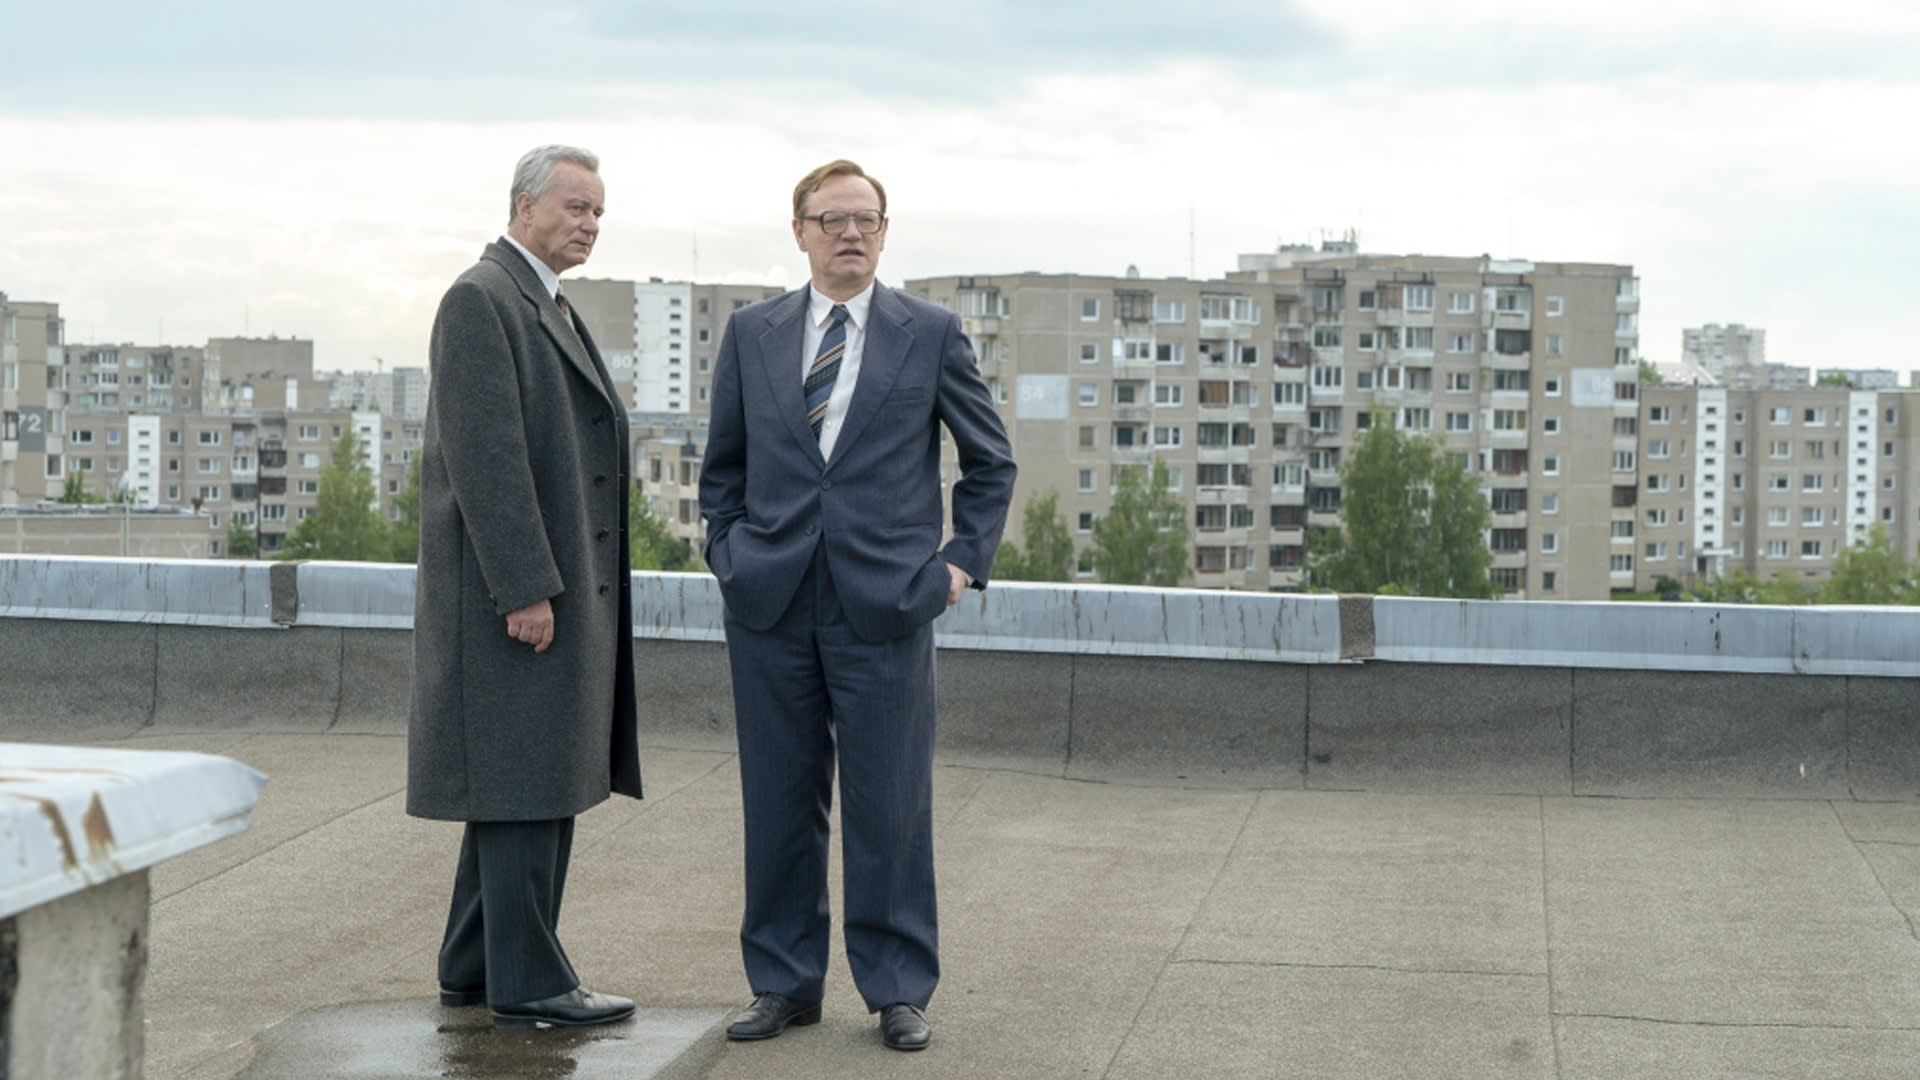 TV Review: 'Chernobyl' Is A Scary, Thought-Provoking Drama About The 1986 Nuclear Disaster